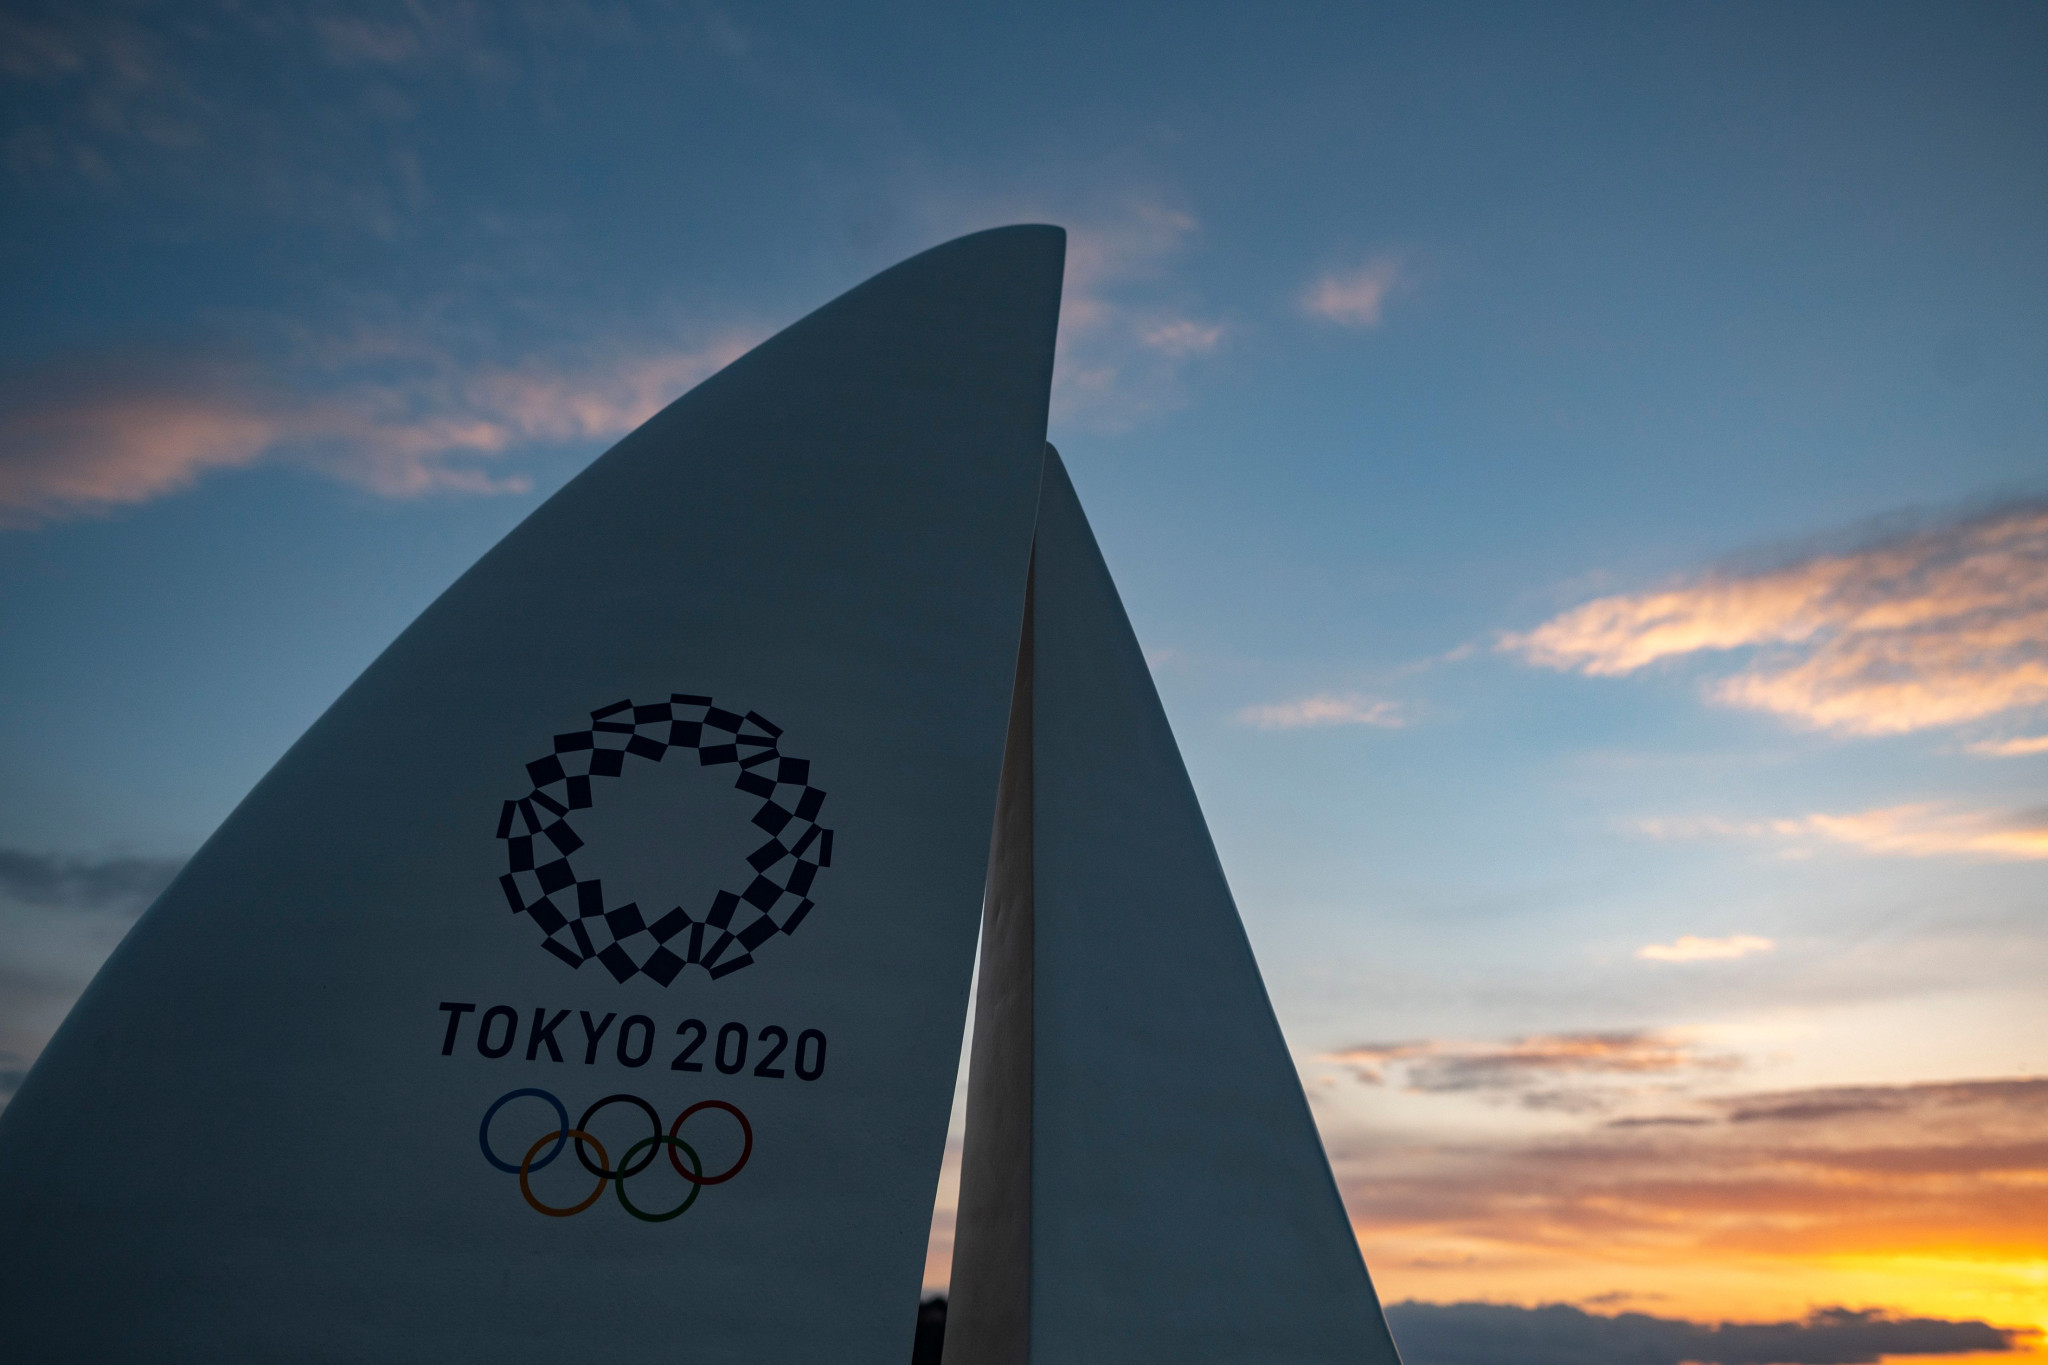 IOC urged to provide clear refund policy if overseas fans unable to attend Tokyo 2020